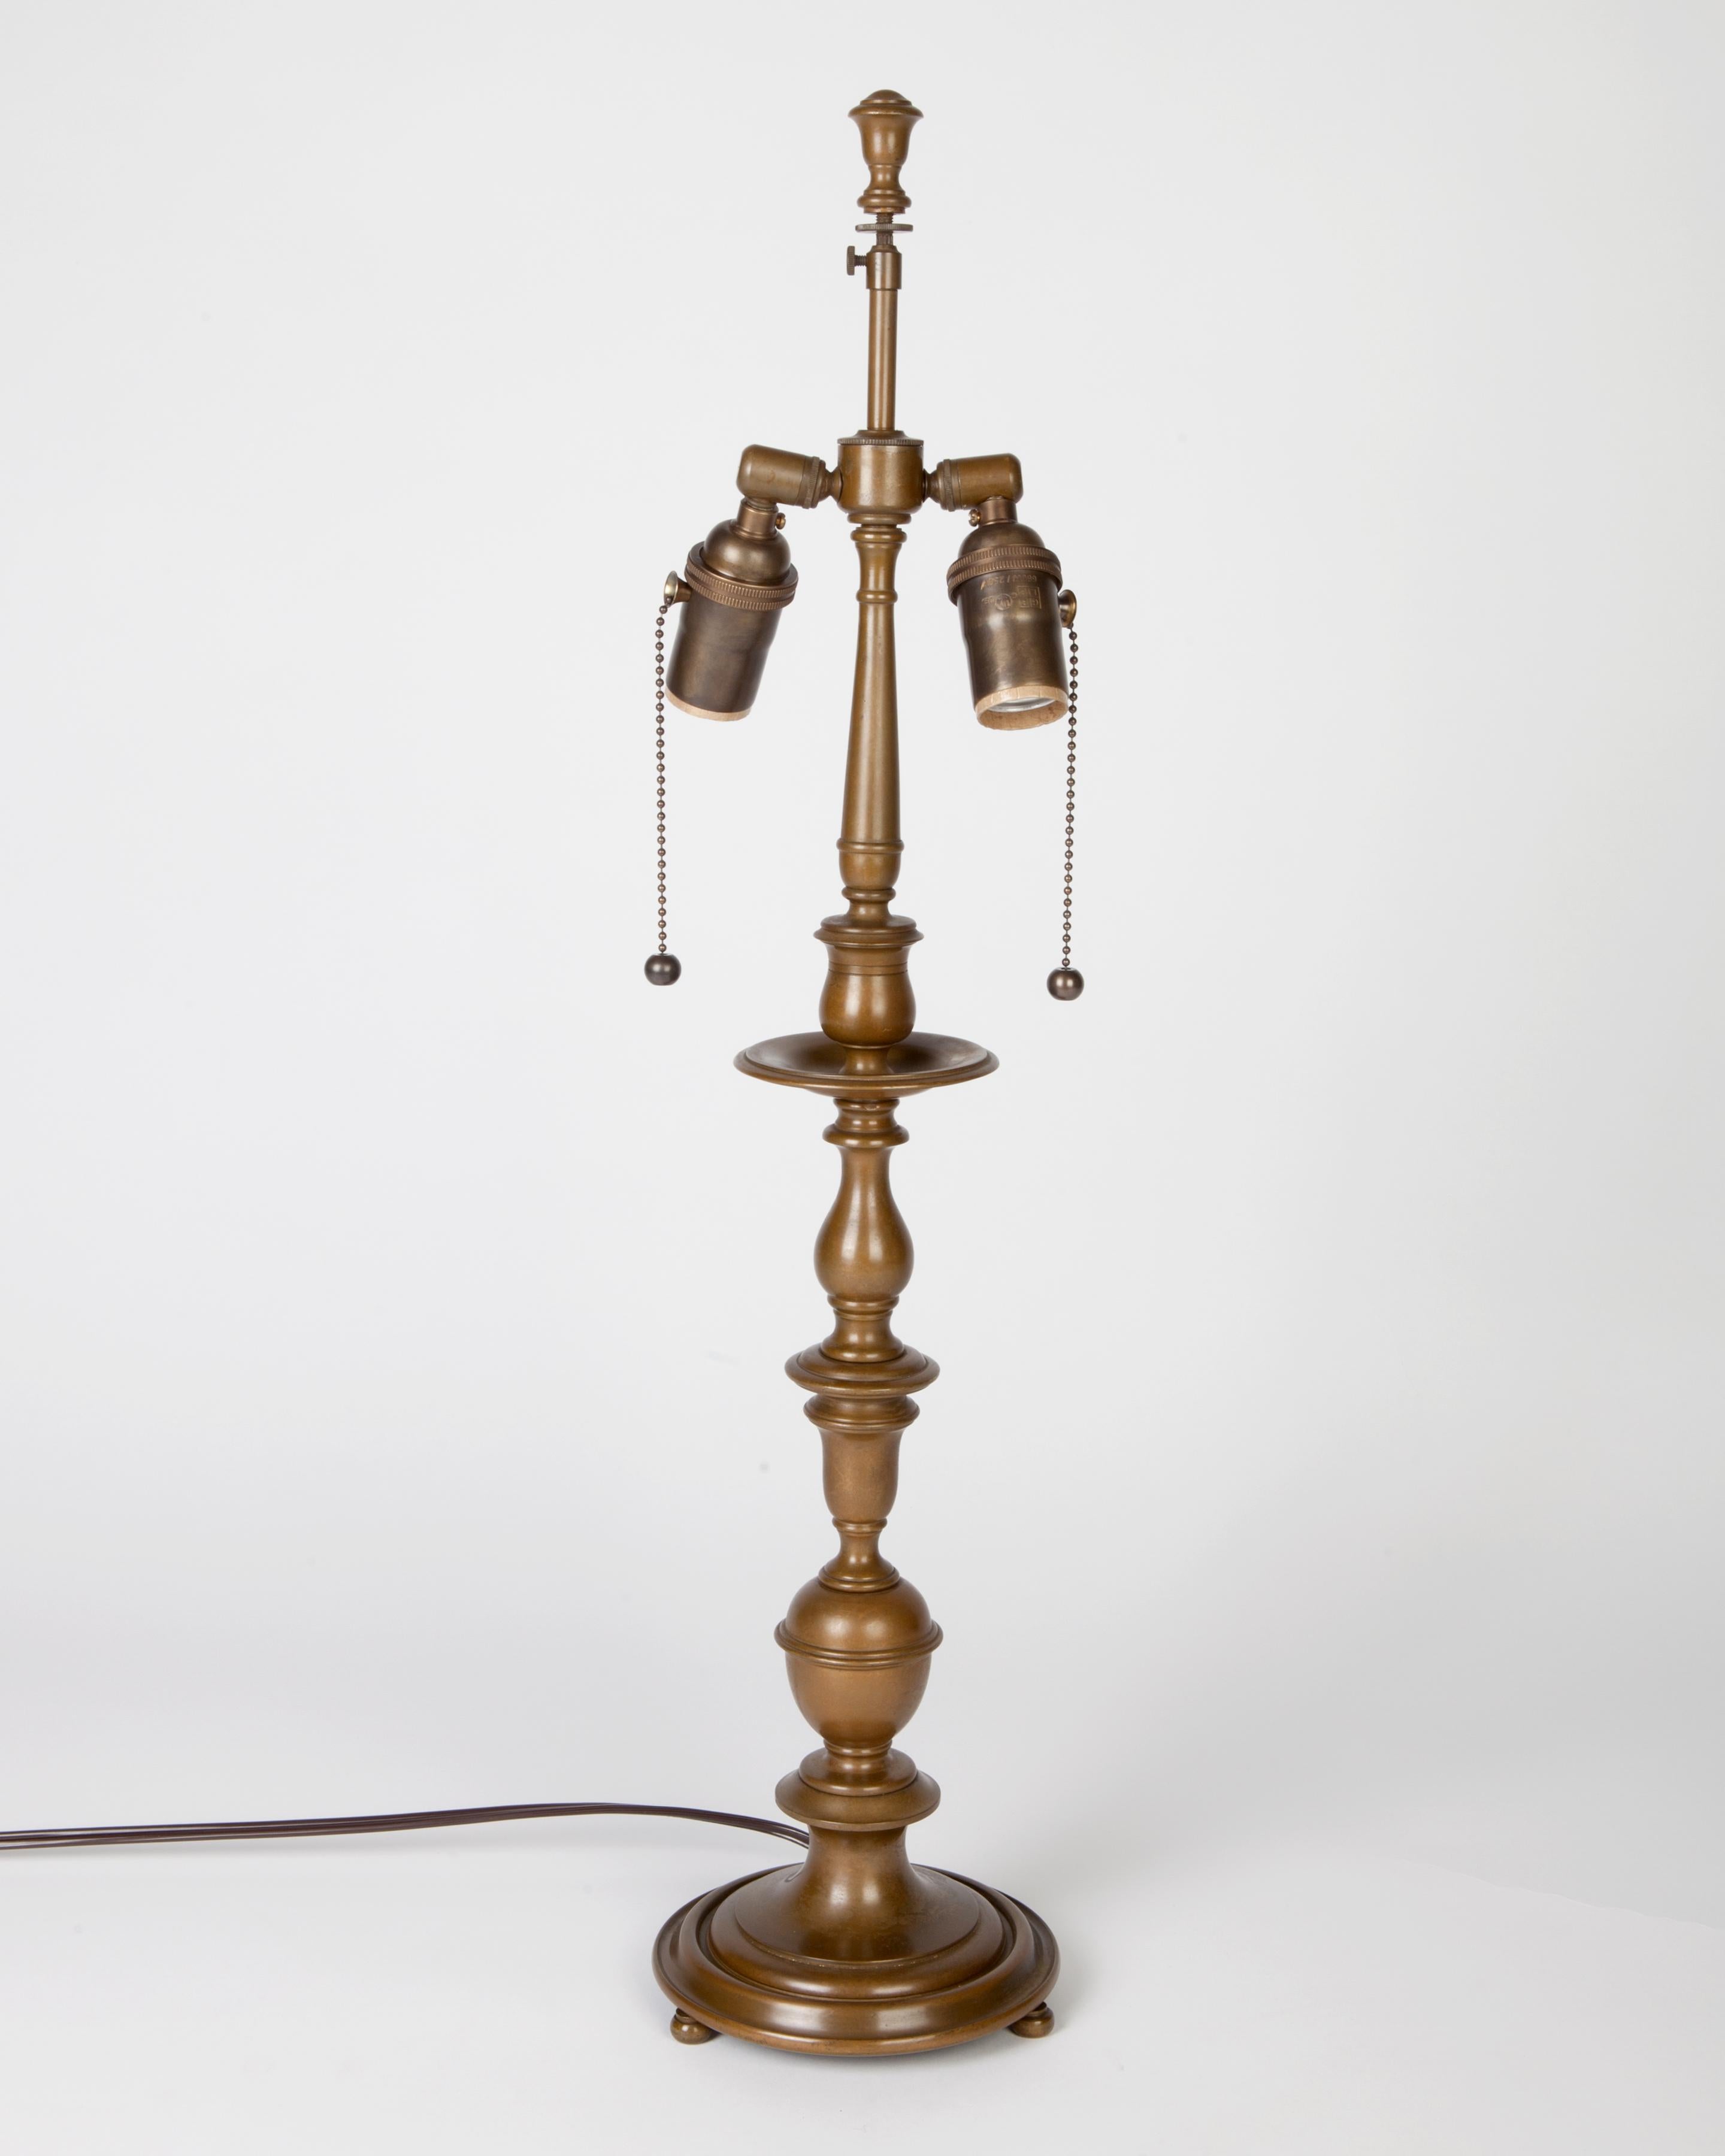 ATL1901
A bronze Baroque desk lamp in its original age-darkened finish signed by the New York maker E. F. Caldwell circa 1950s. It’s quite similar, though not an exact match to those in the great reading hall of the 42nd Street branch of the New